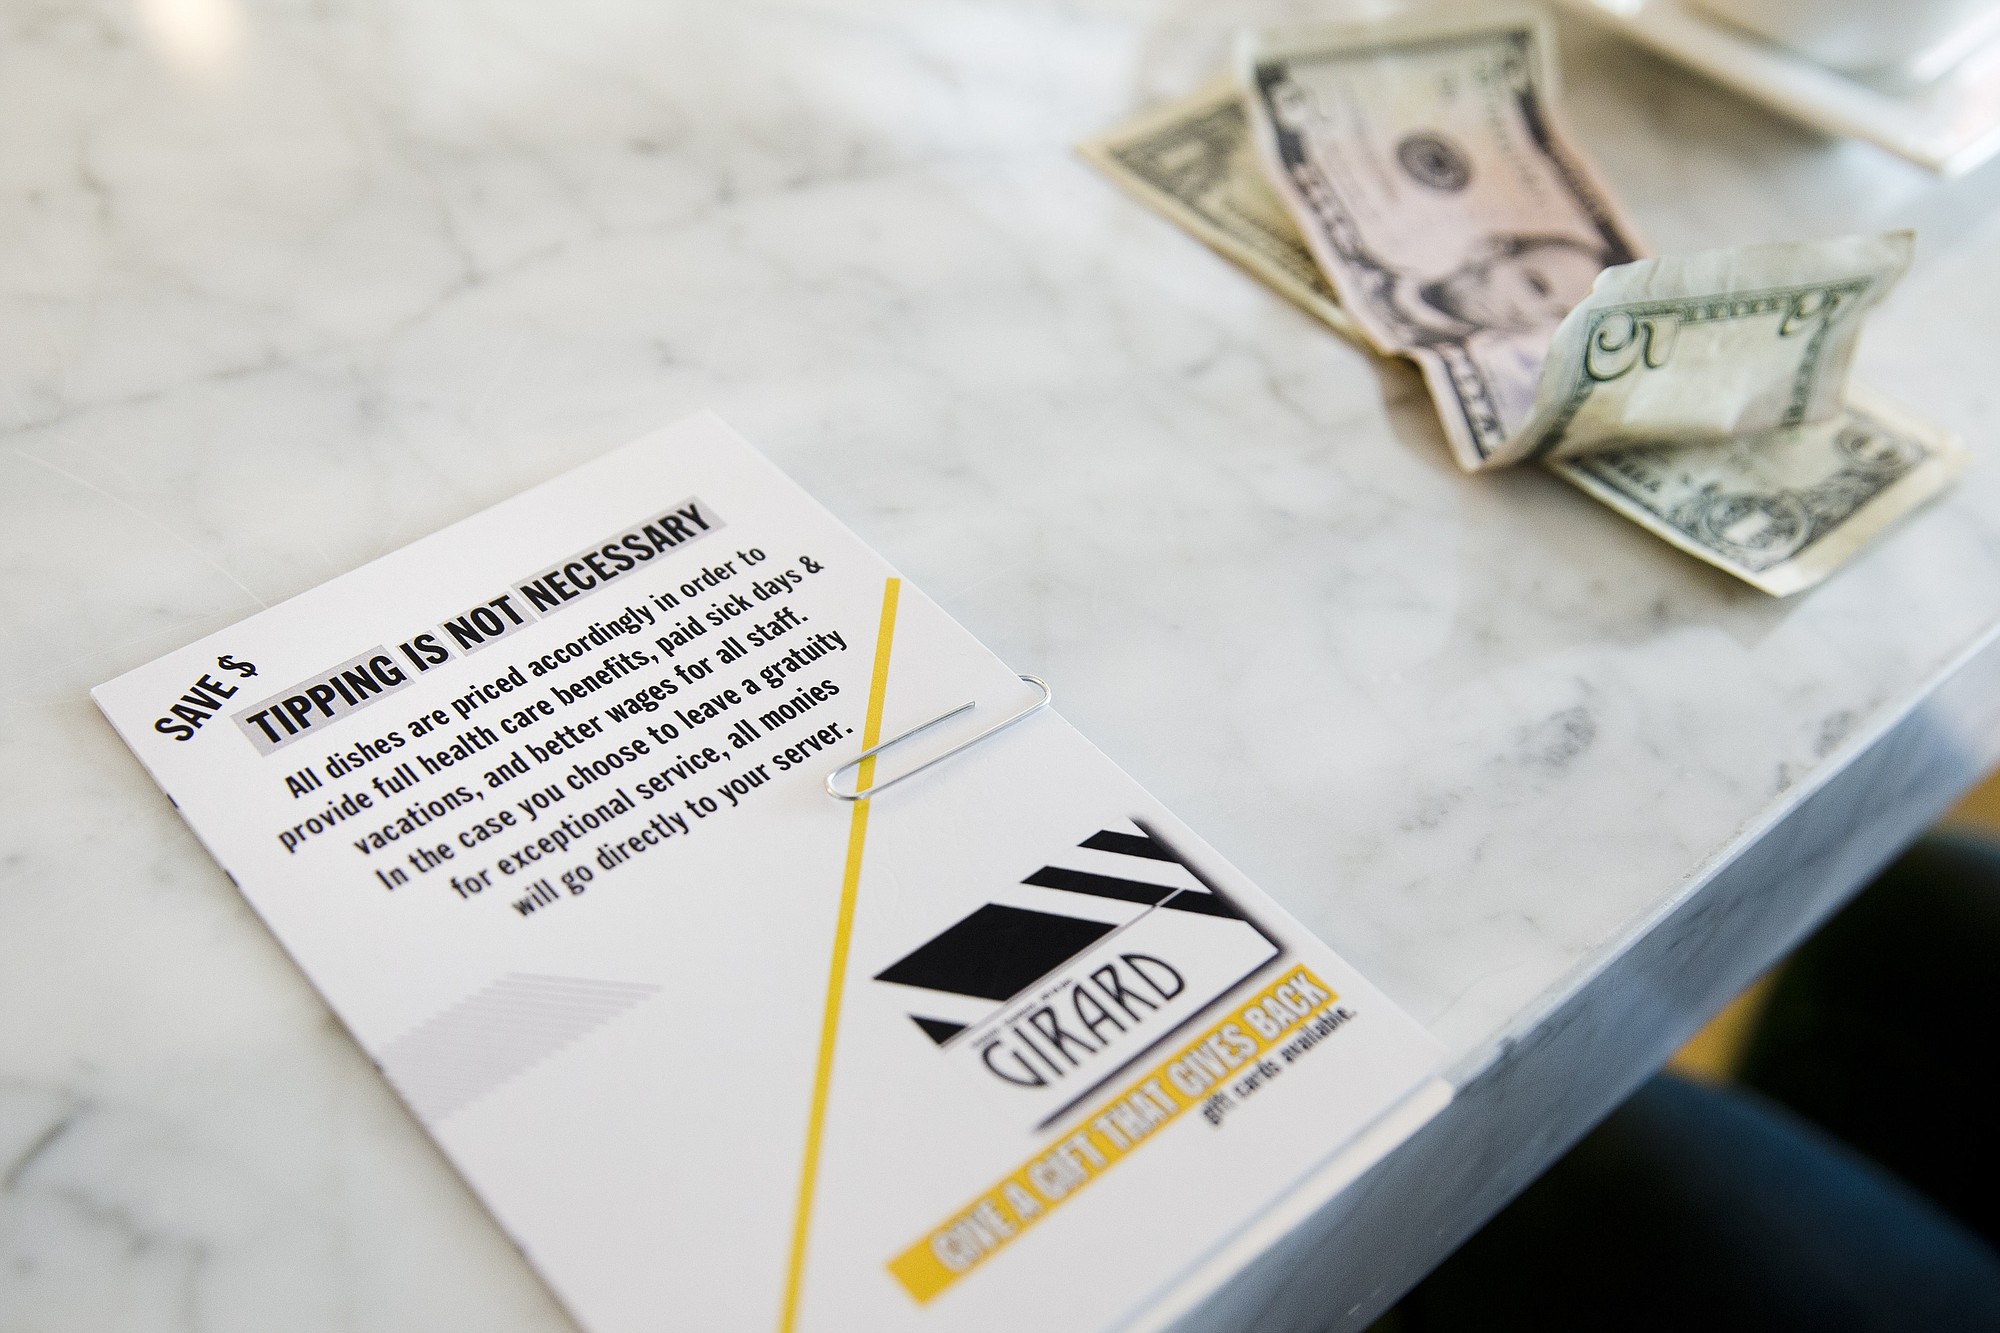 Displayed is a card presented with a bill Tuesday at Girard, a &quot;no-tip&quot; restaurant in Philadelphia.